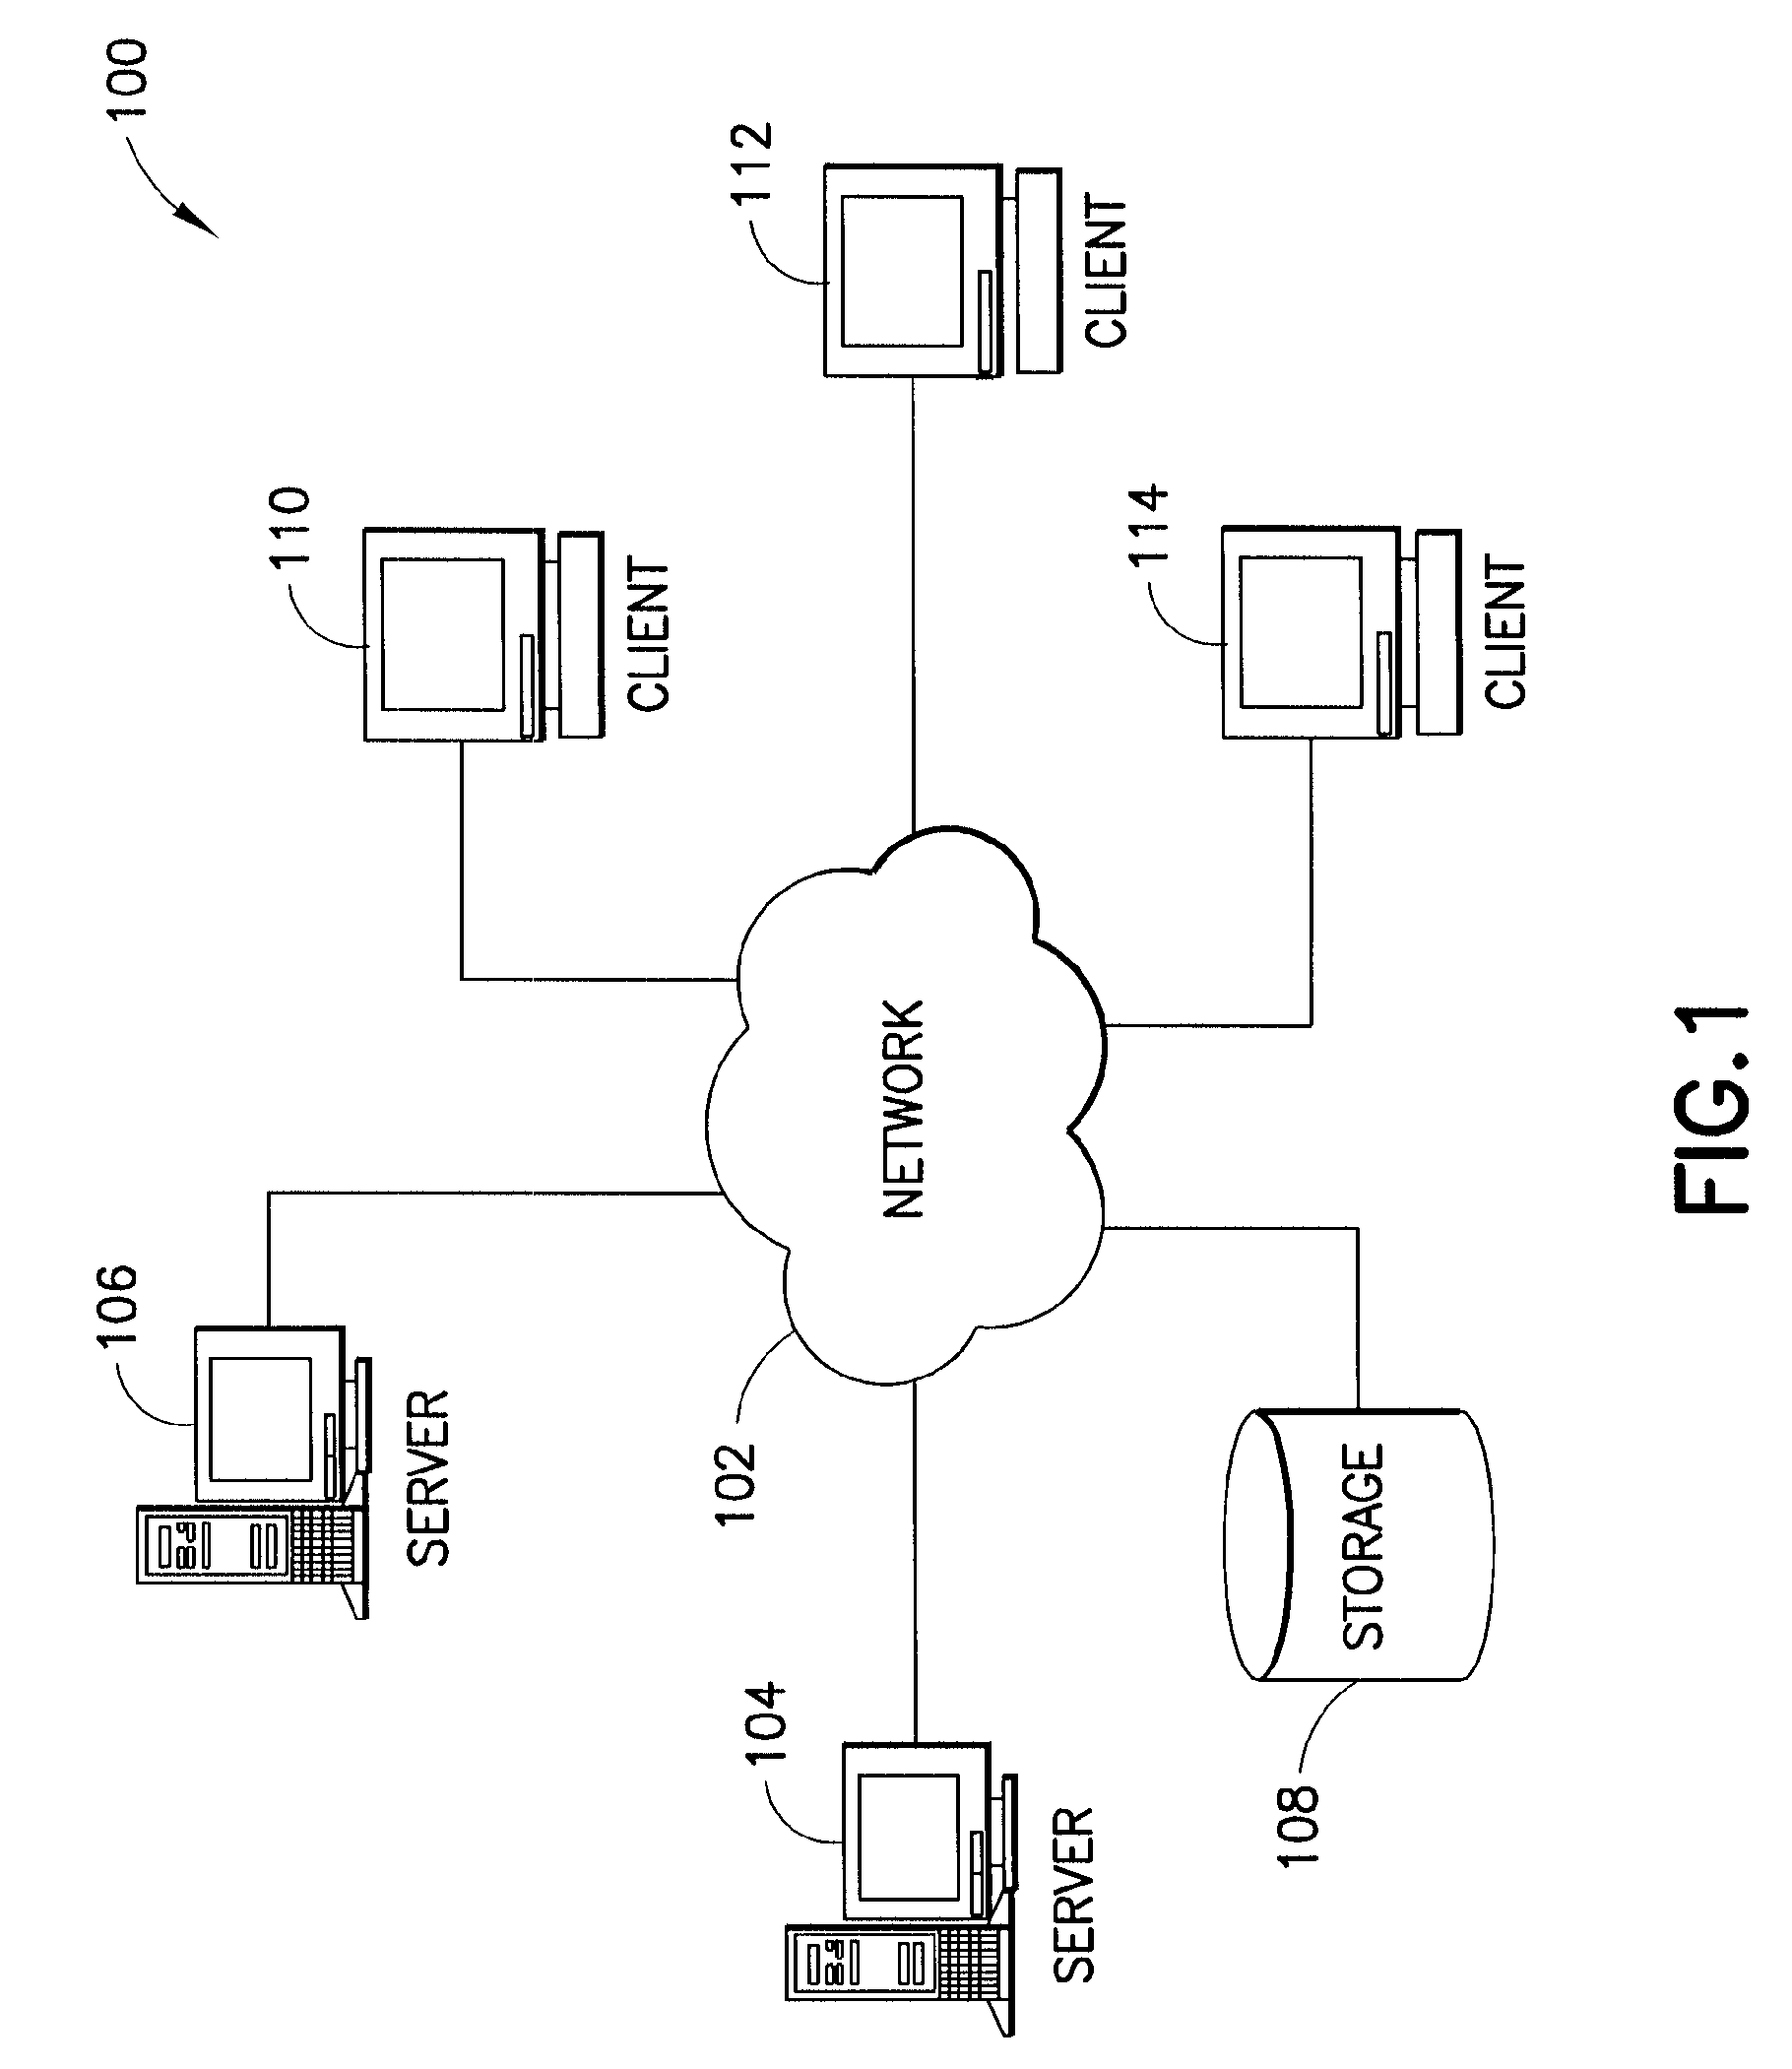 System and Method for Semantic Normalization of Healthcare Data to Support Derivation Conformed Dimensions to Support Static and Aggregate Valuation Across Heterogeneous Data Sources